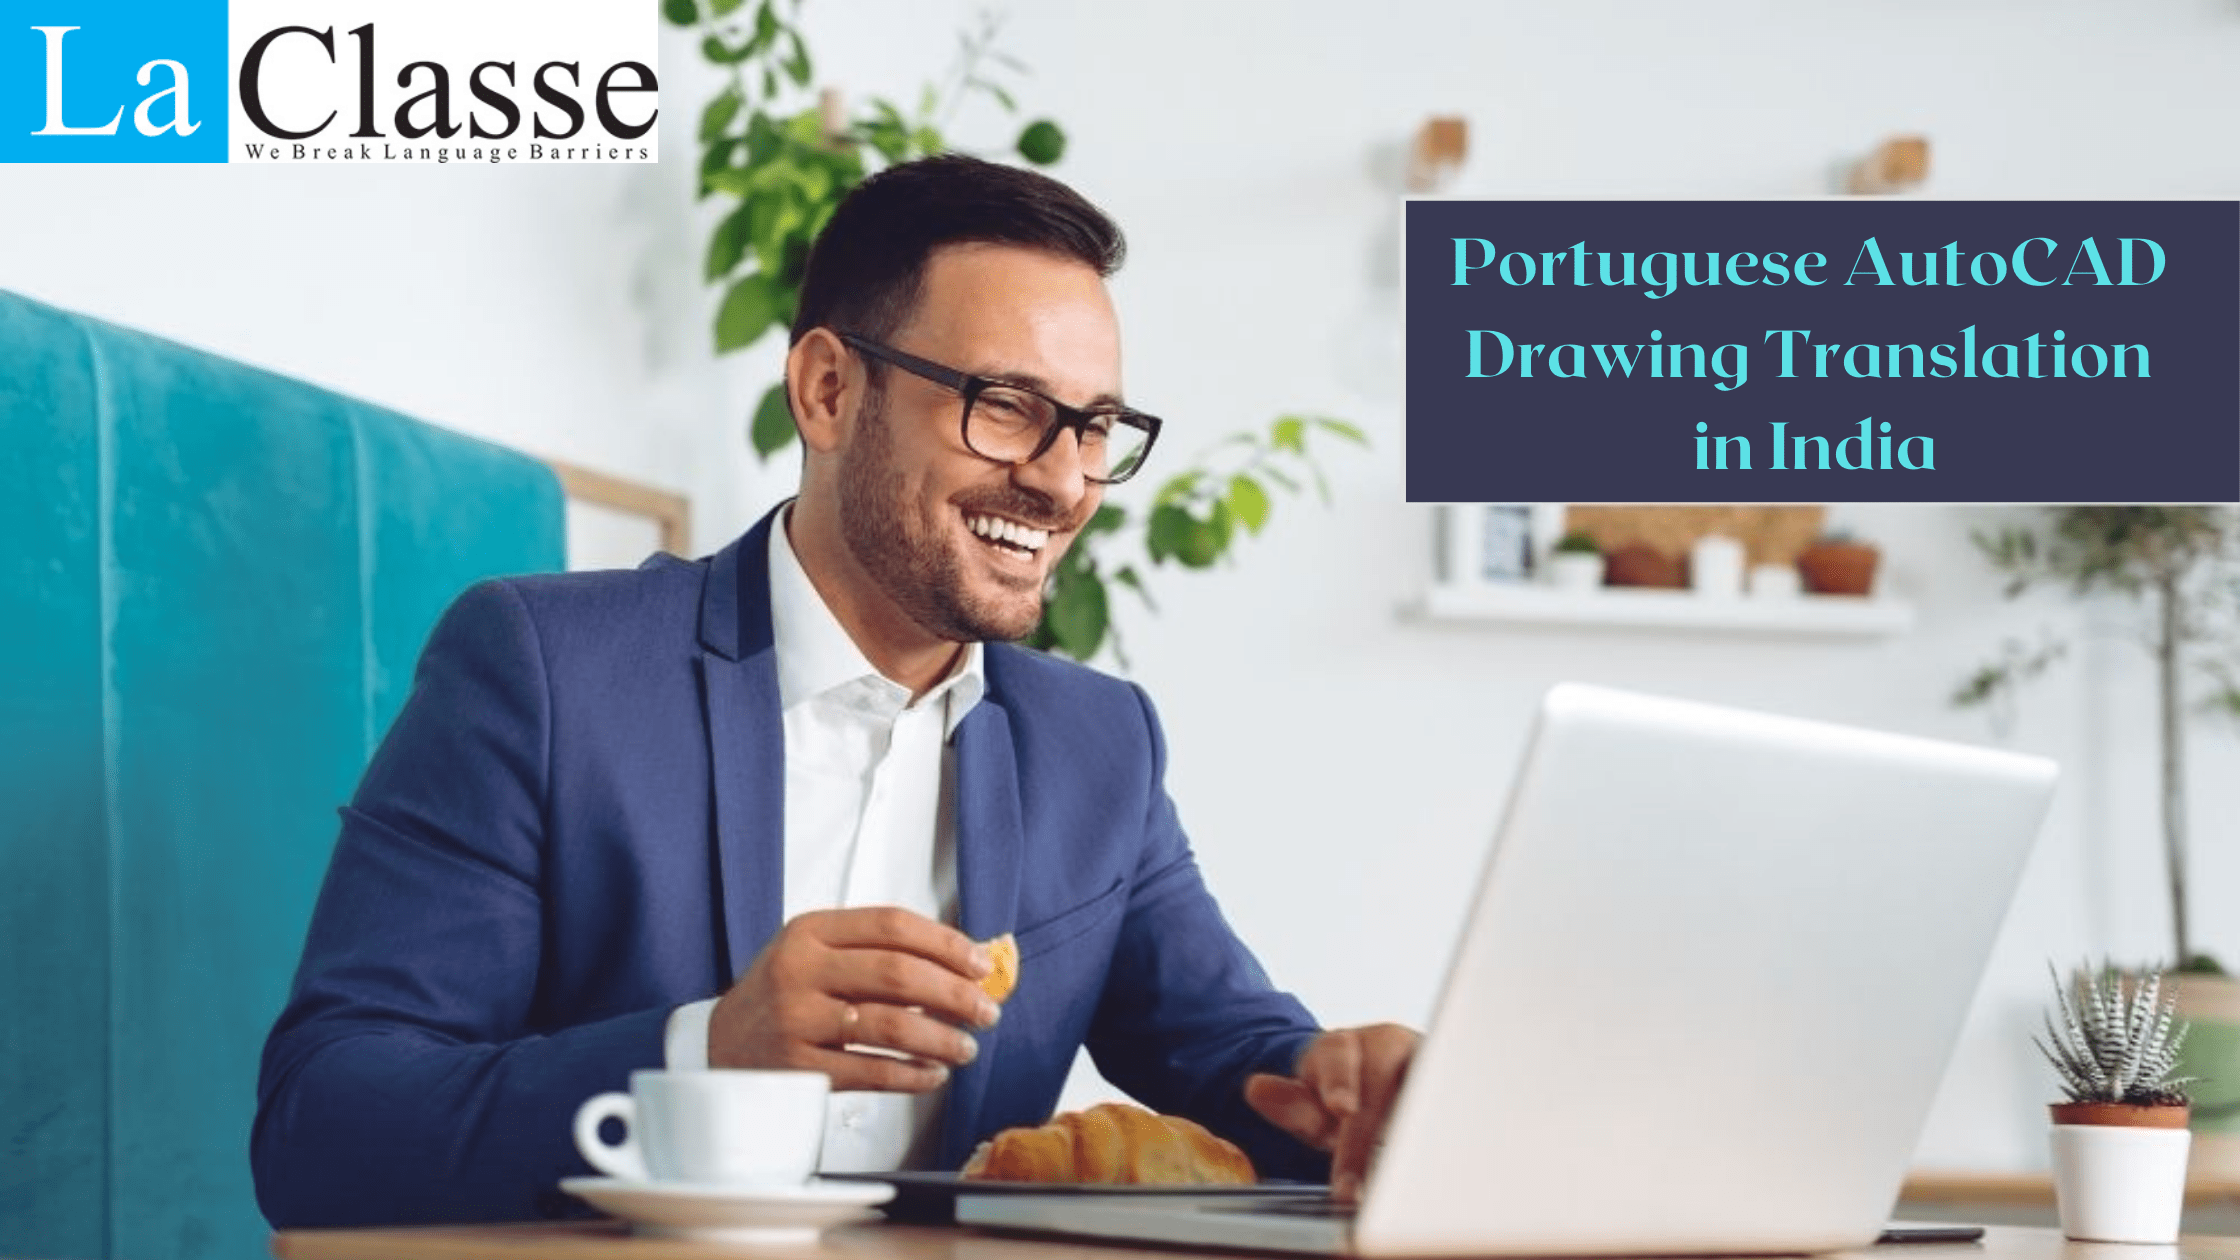 Portuguese AutoCAD Drawing Translation in India